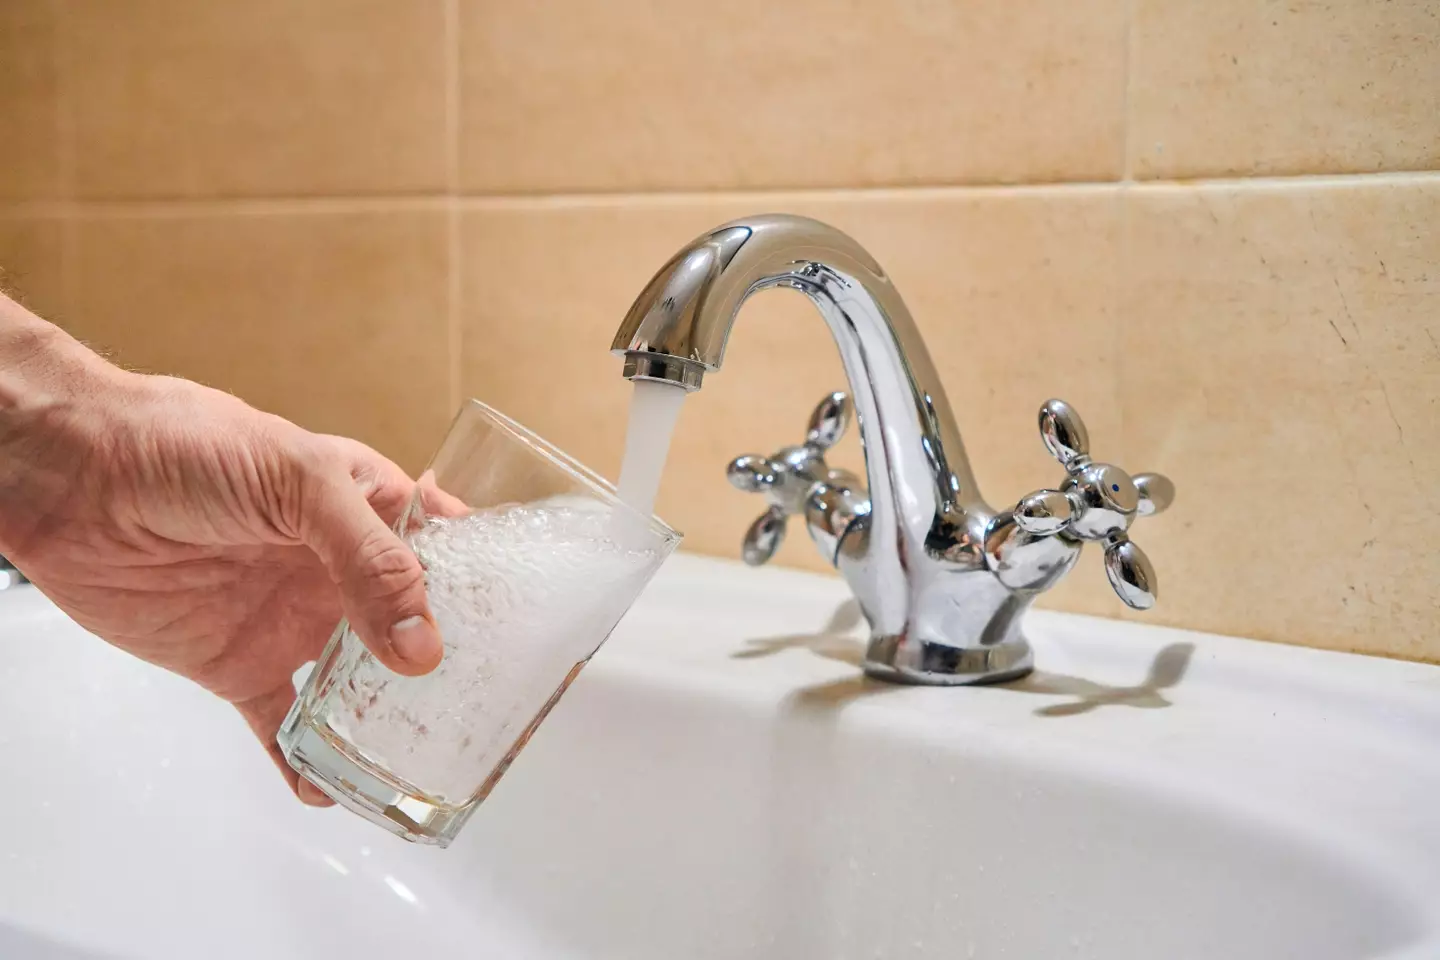 The bathroom tap may not be the best place to get your dose of H2O.